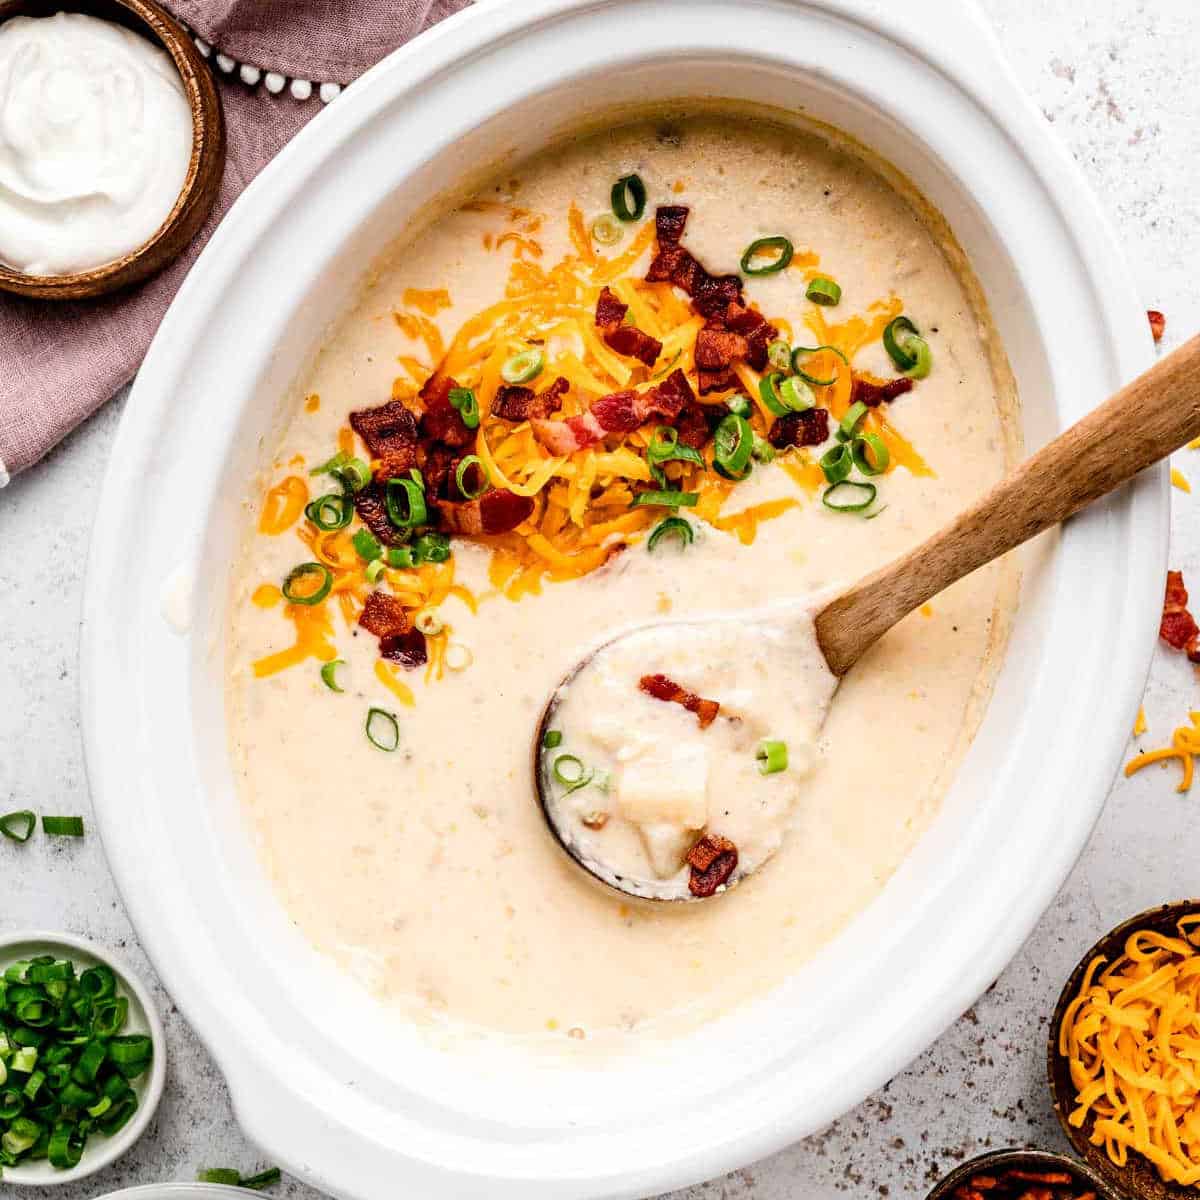 A wooden spoon scooping up some slow cooker loaded baked potato soup.